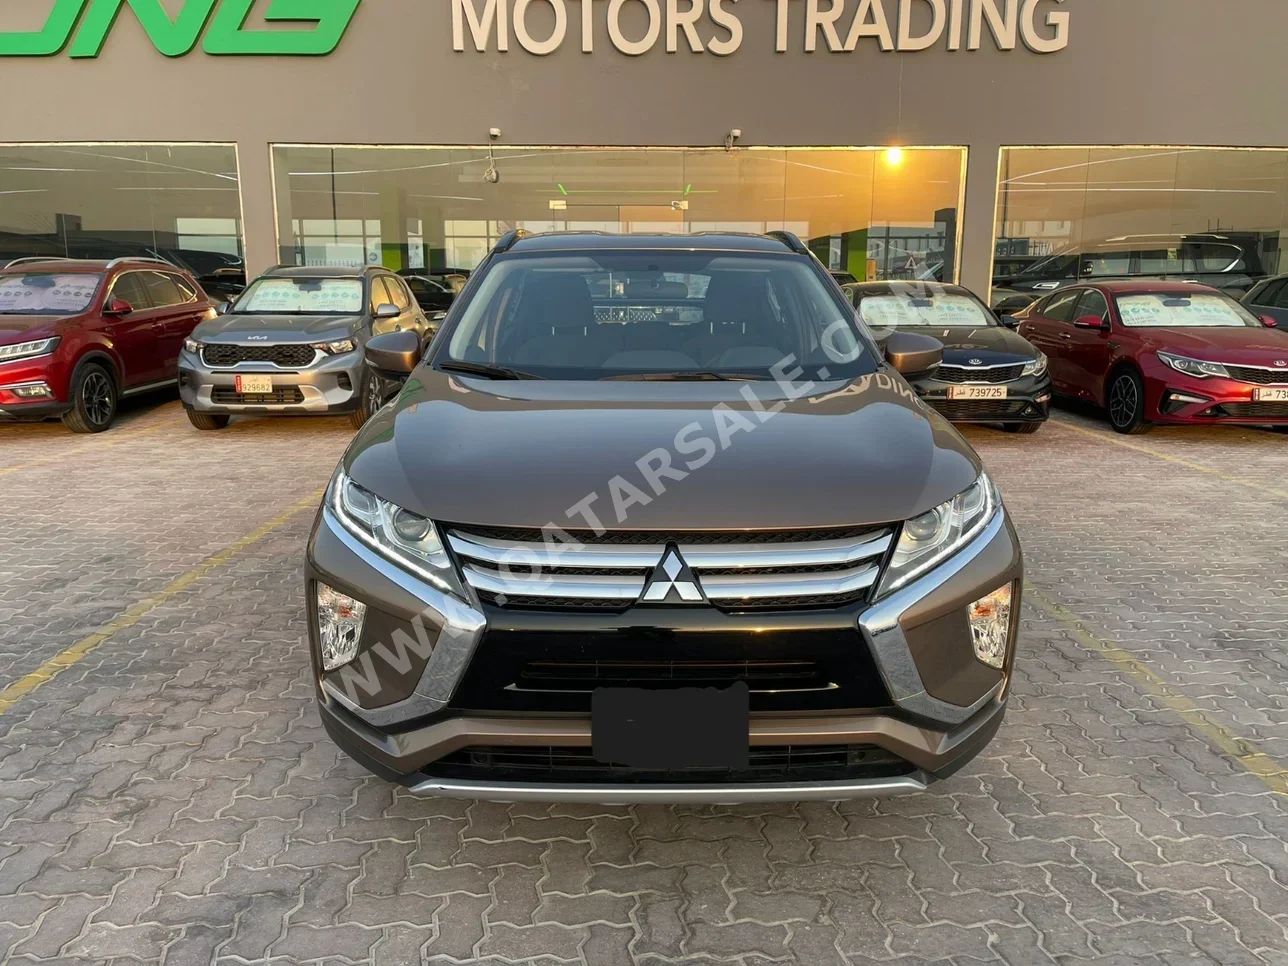 Mitsubishi  Eclipse  Cross Highline  2020  Automatic  63,000 Km  4 Cylinder  Four Wheel Drive (4WD)  SUV  Brown  With Warranty